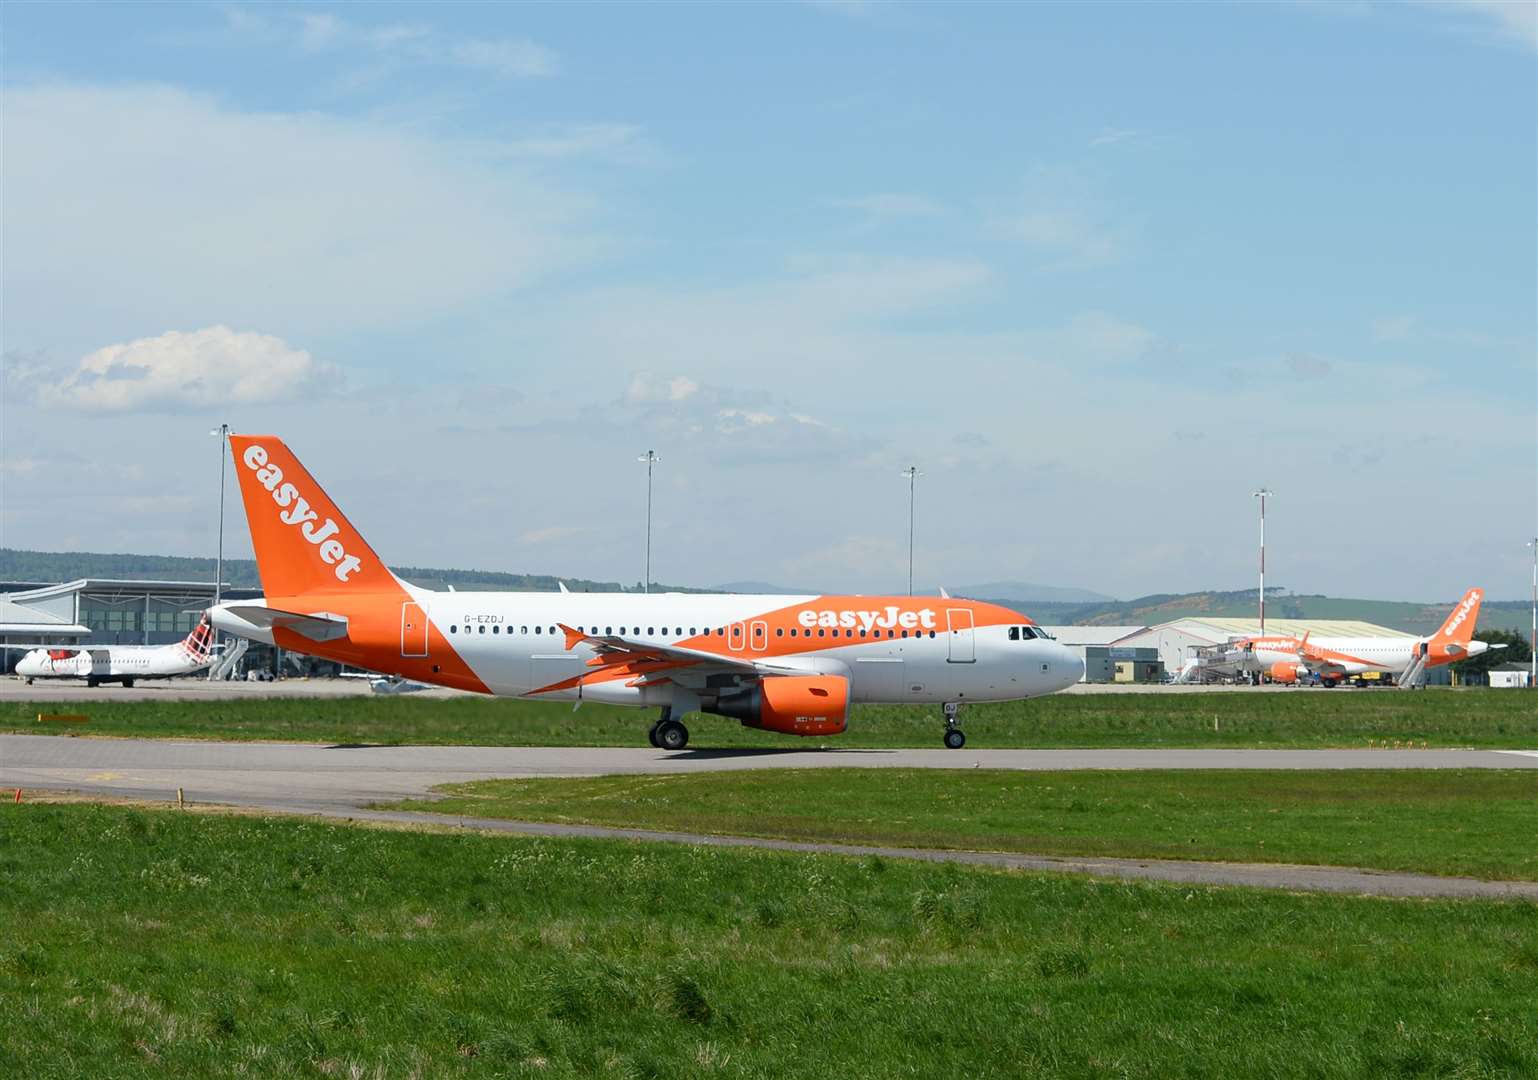 EasyJet cancelled its flight today from Inverness to Bristol.